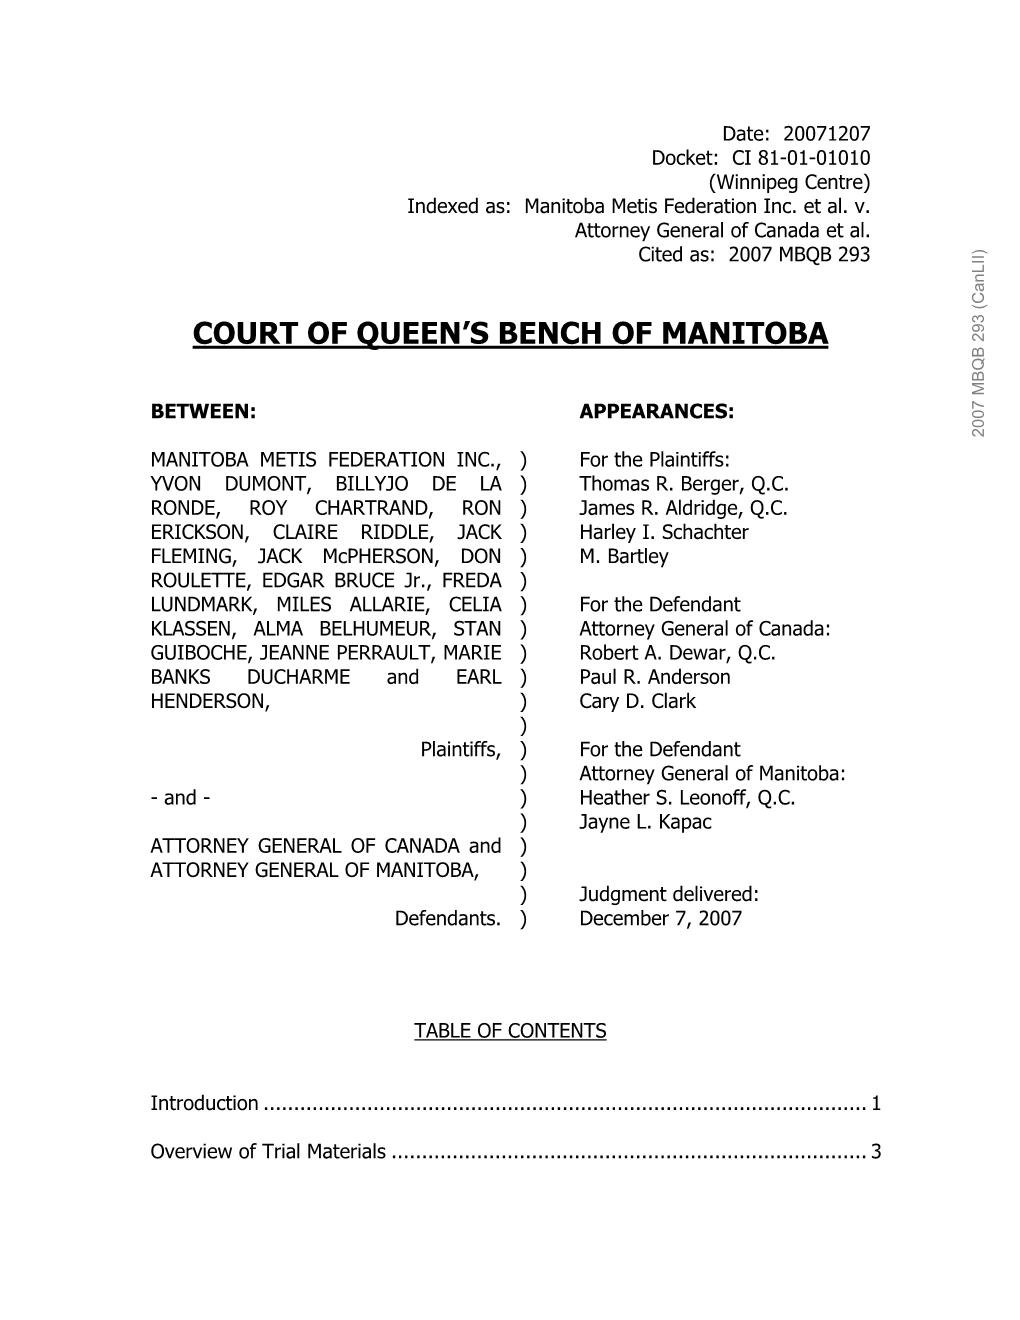 Court of Queen's Bench of Manitoba